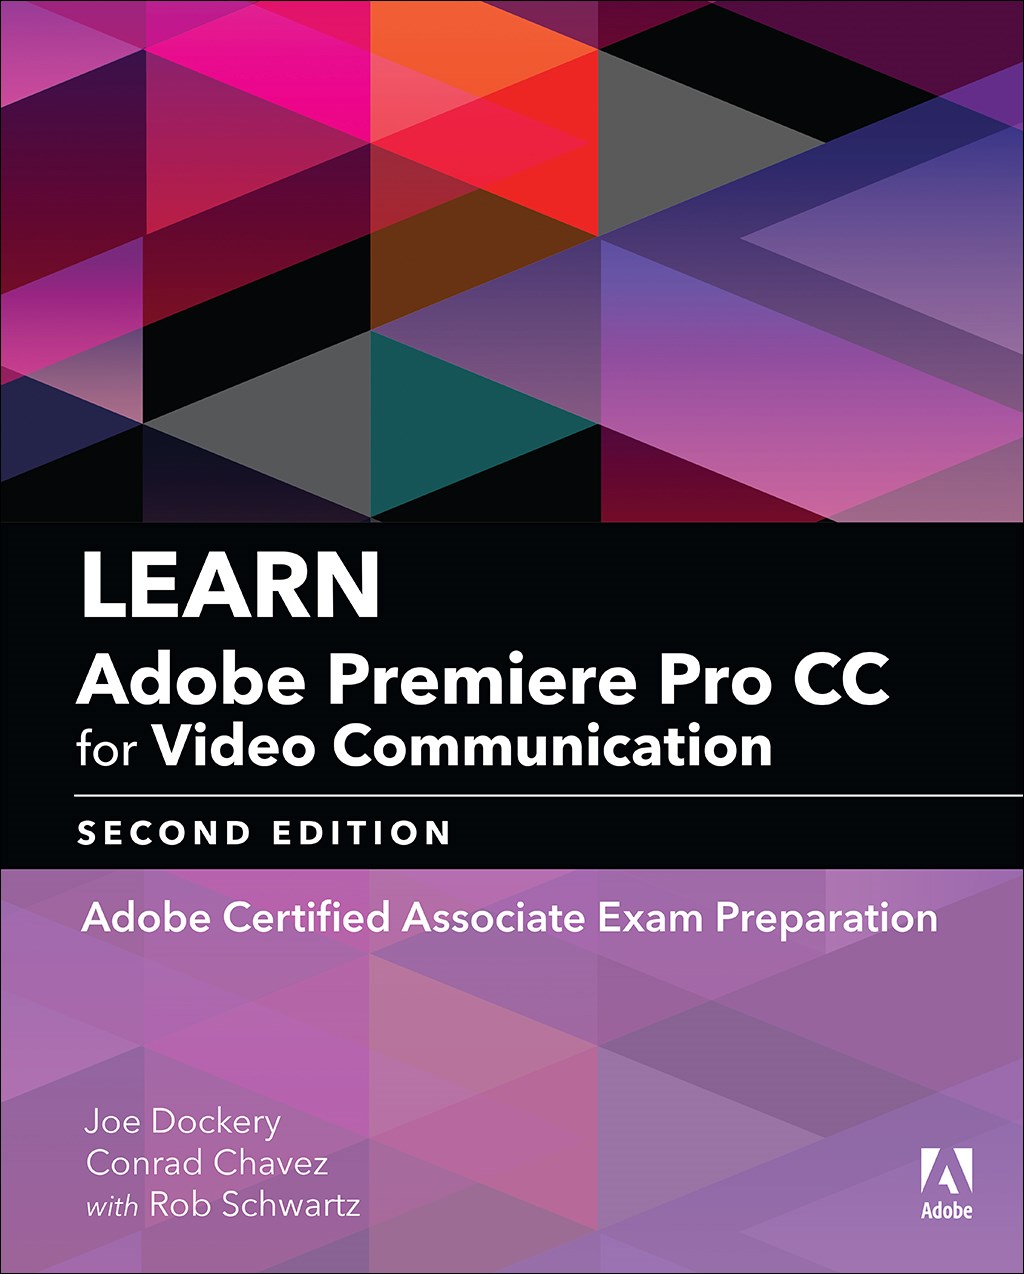 Learn Adobe Premiere Pro CC for Video Communication: Adobe Certified Associate Exam Preparation (Web Edition), 2nd Edition